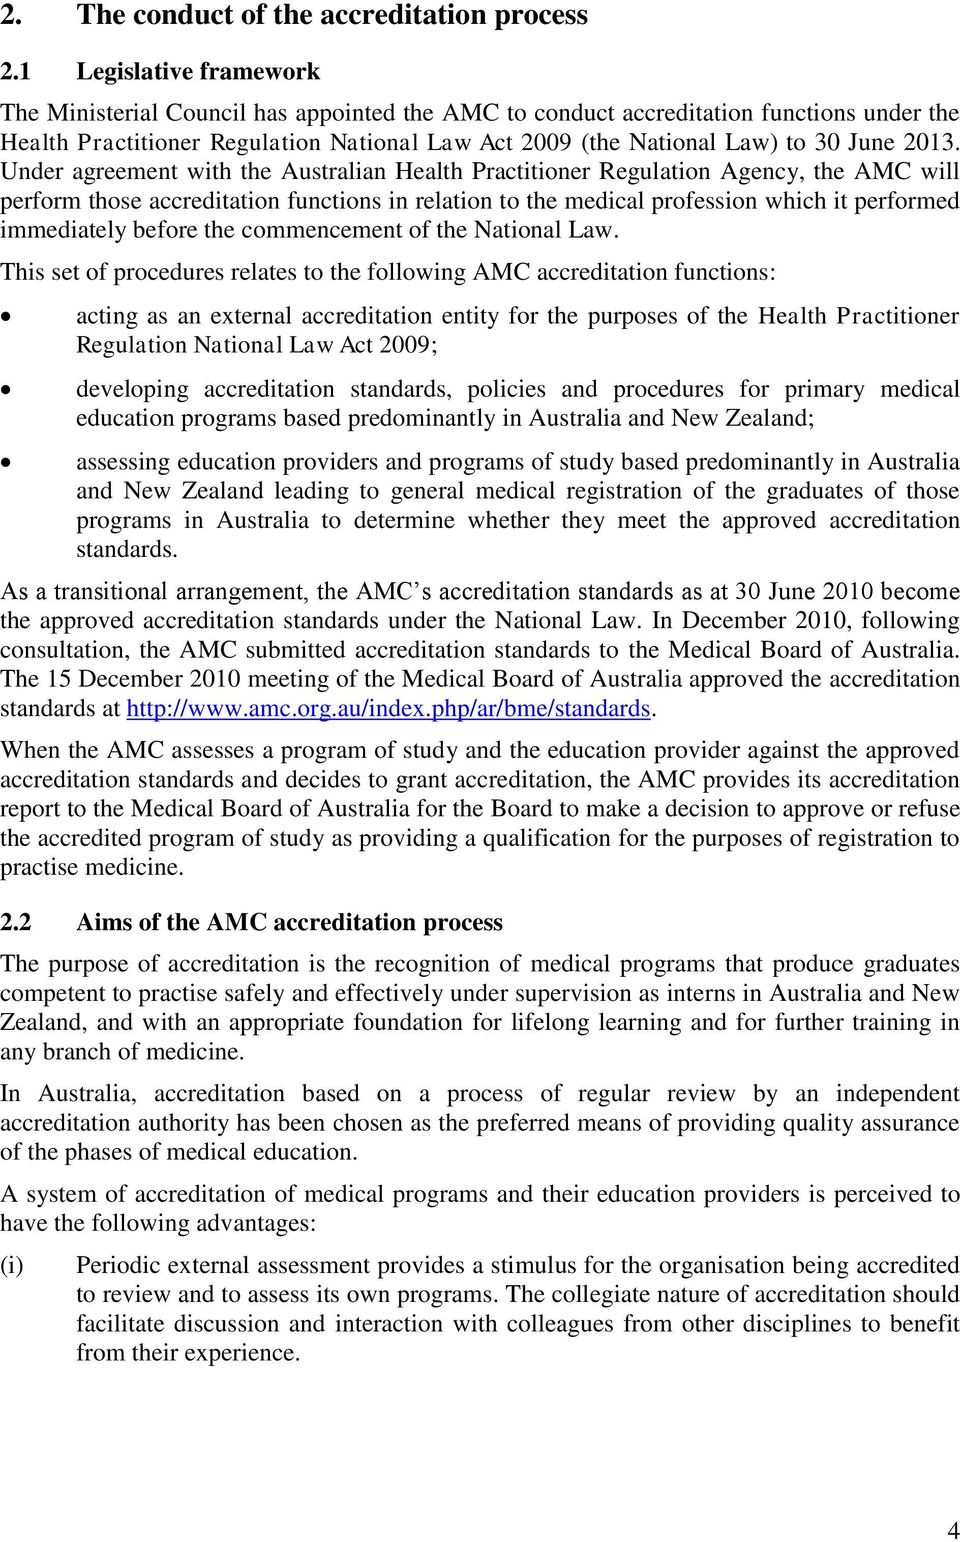 2013. Under agreement with the Australian Health Practitioner Regulation Agency, the AMC will perform those accreditation functions in relation to the medical profession which it performed